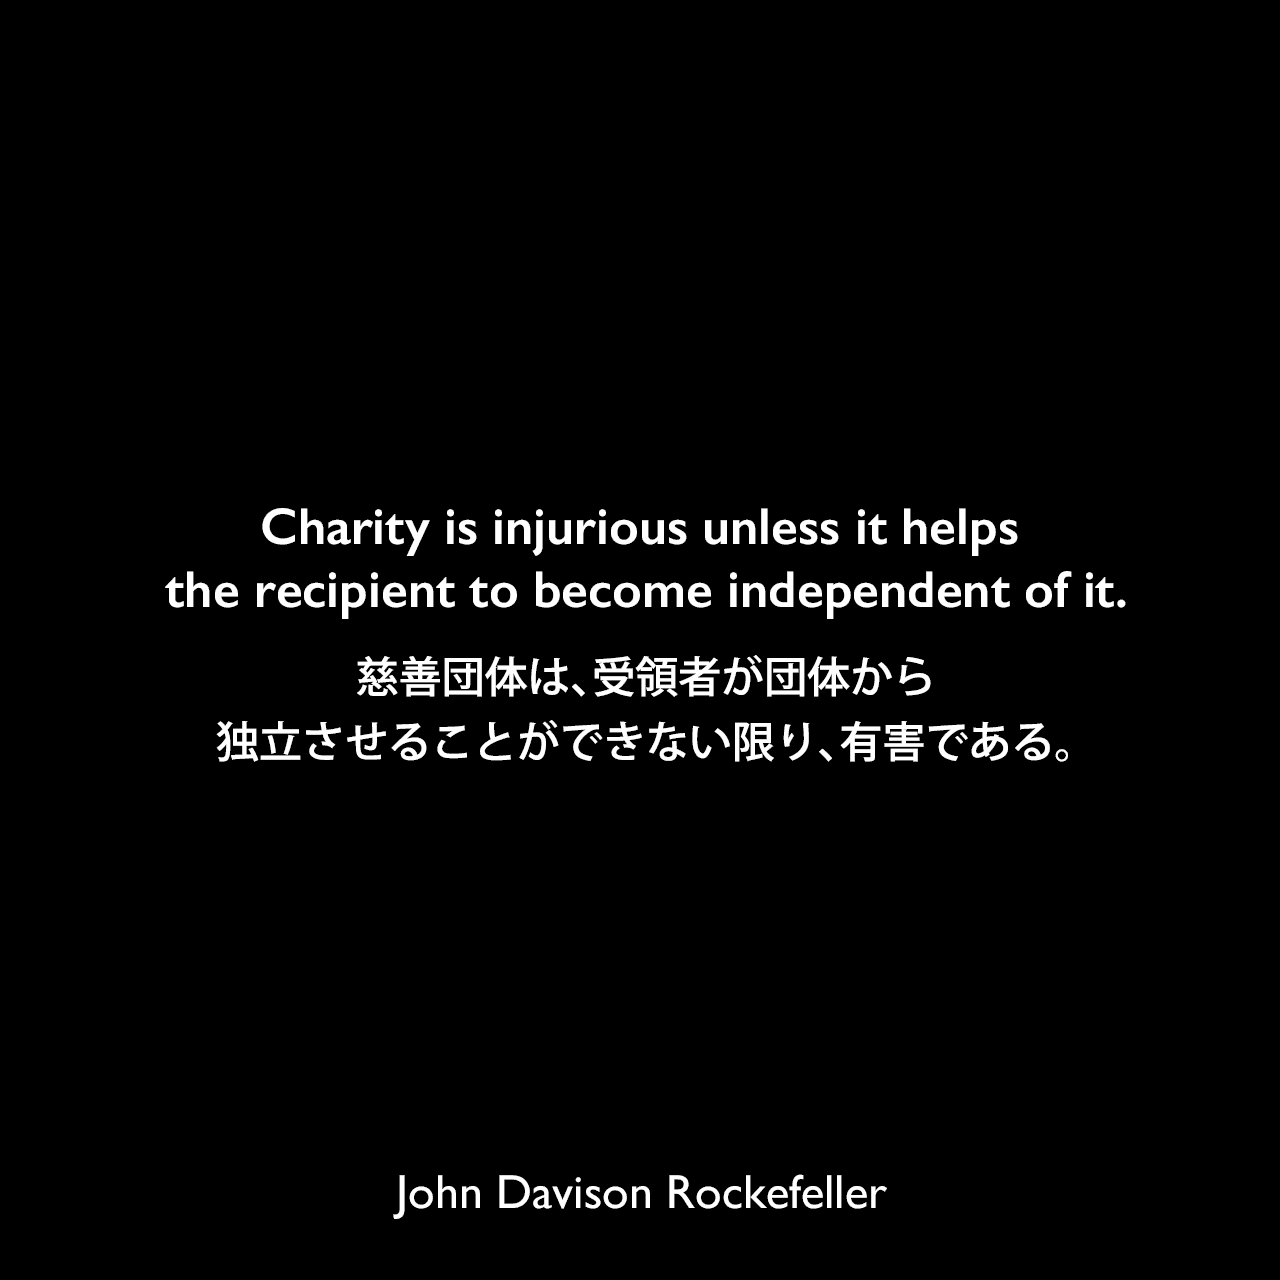 Charity is injurious unless it helps the recipient to become independent of it.慈善団体は、受領者が団体から独立させることができない限り、有害である。John Davison Rockefeller